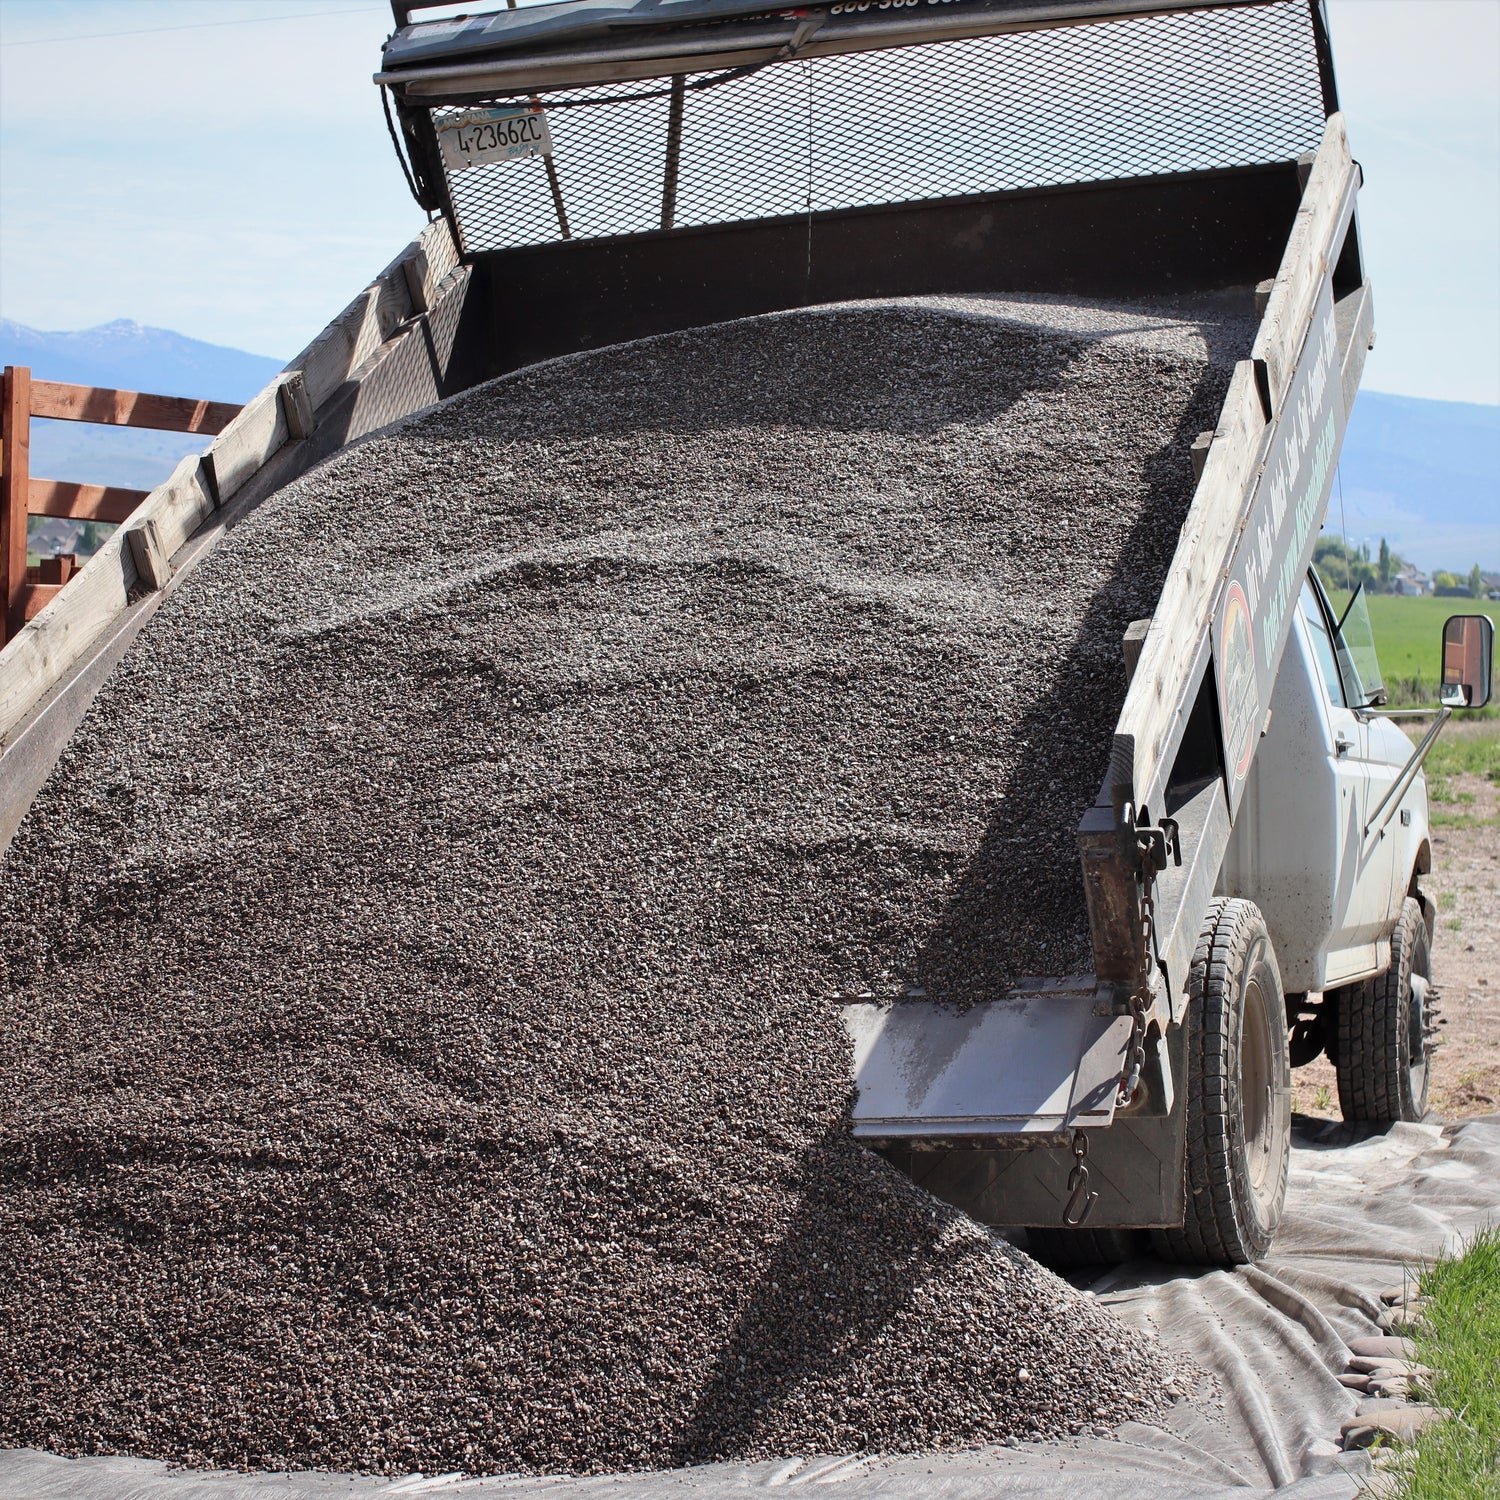 A Dump of gravel from Missoula Dirt Delivery